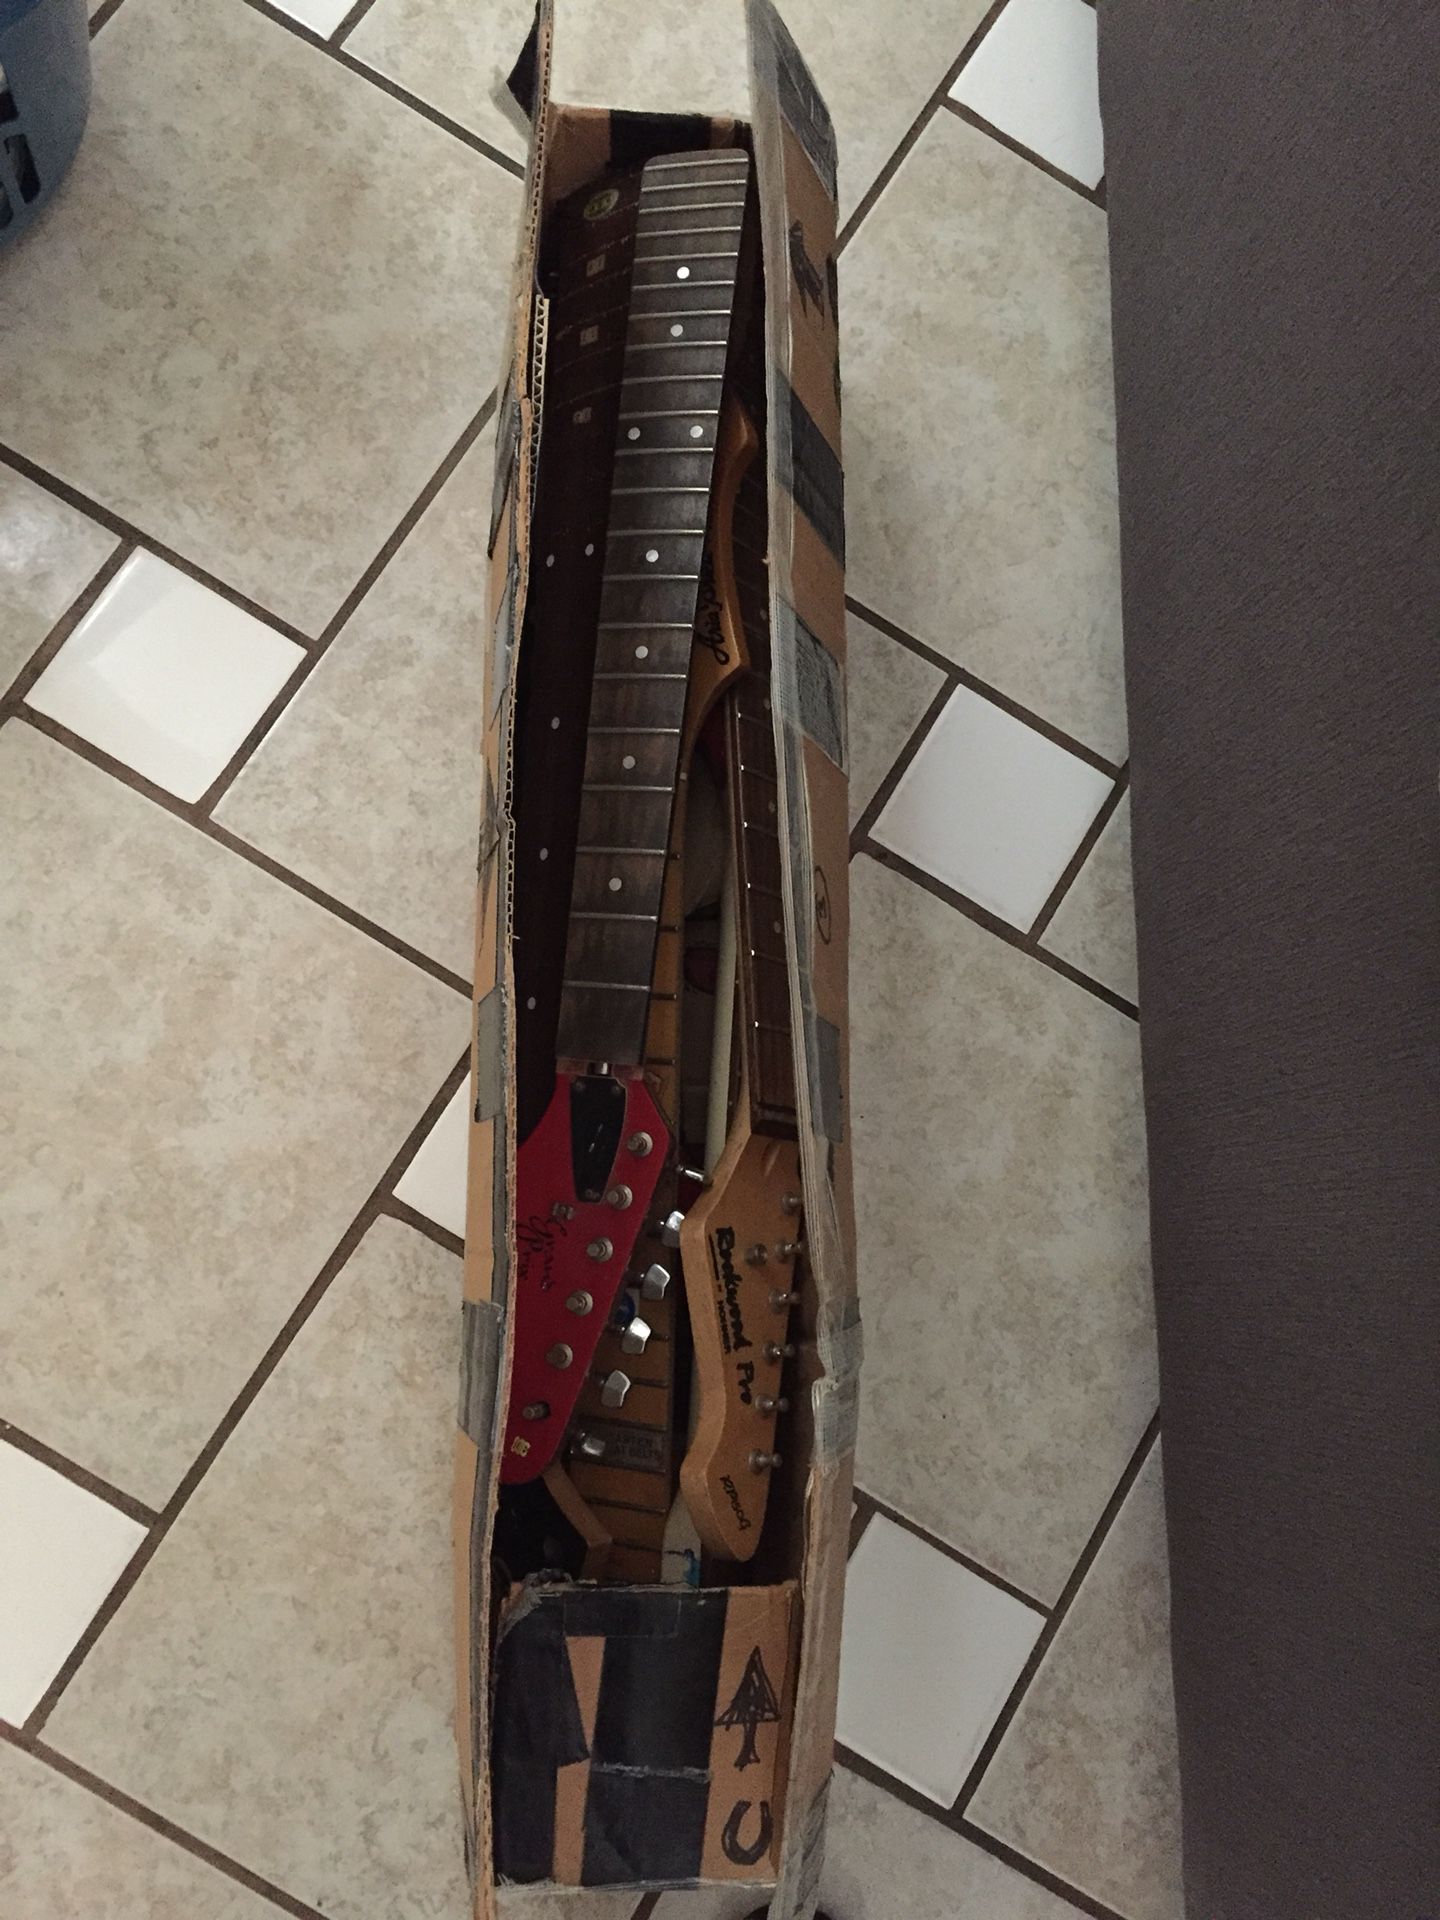 Terrapin guitar case and guitar for Sale in Las Vegas, NV - OfferUp